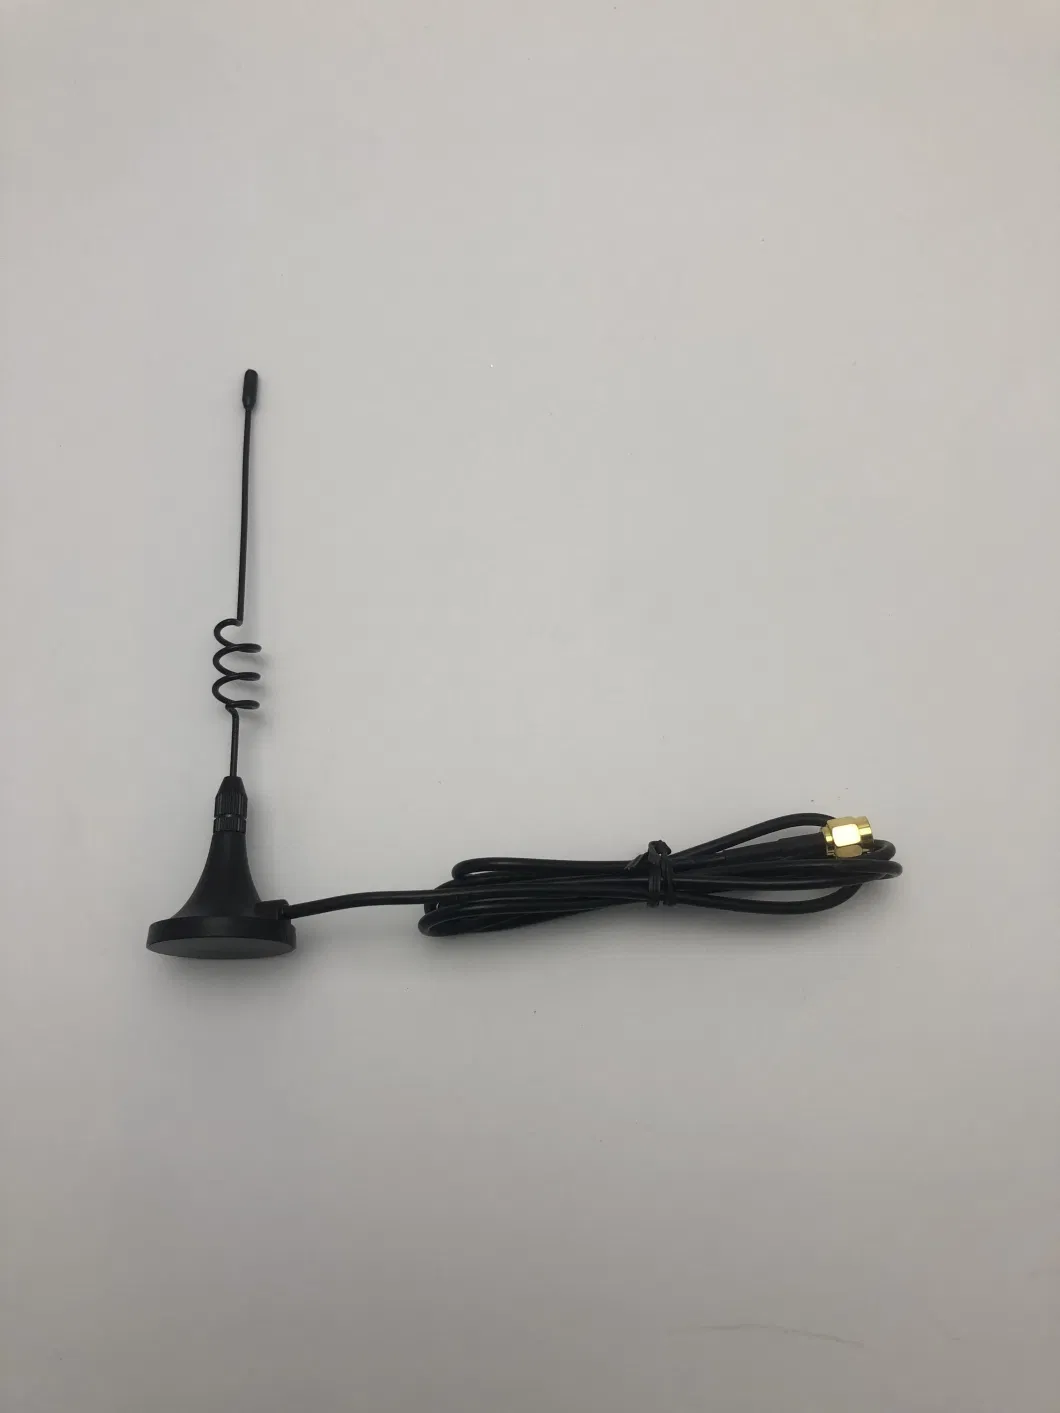 WiFi Dual Band Antenna 2.4/5.8g Magnetic